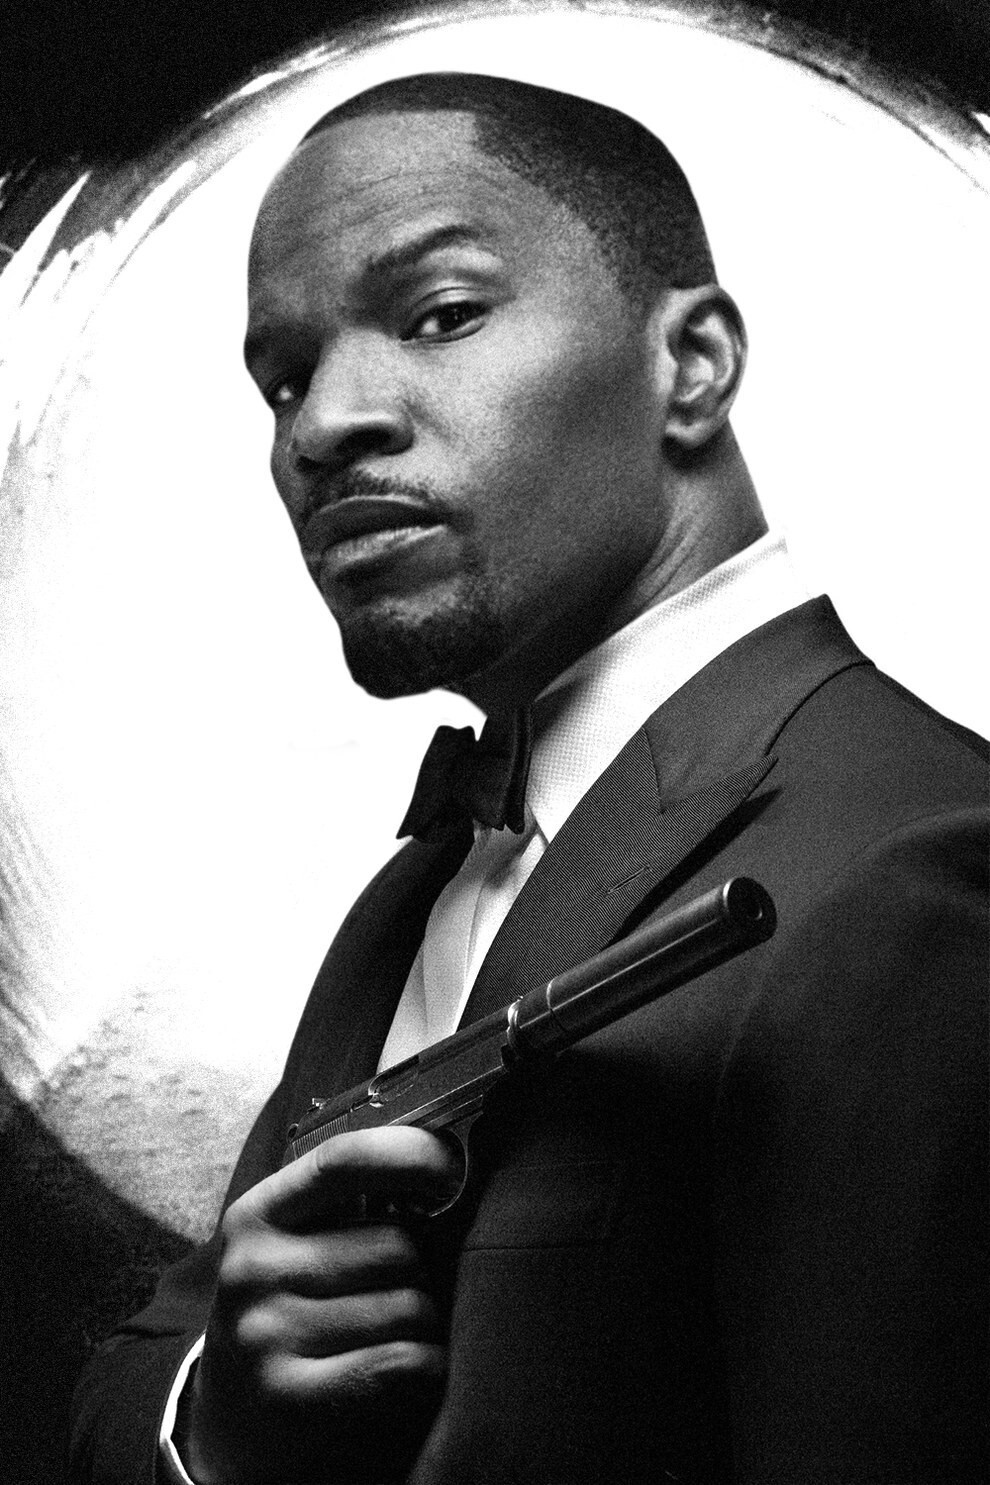 It’s not much of a stretch to imagine a man named Jamie Foxx taking on the role of Bond.